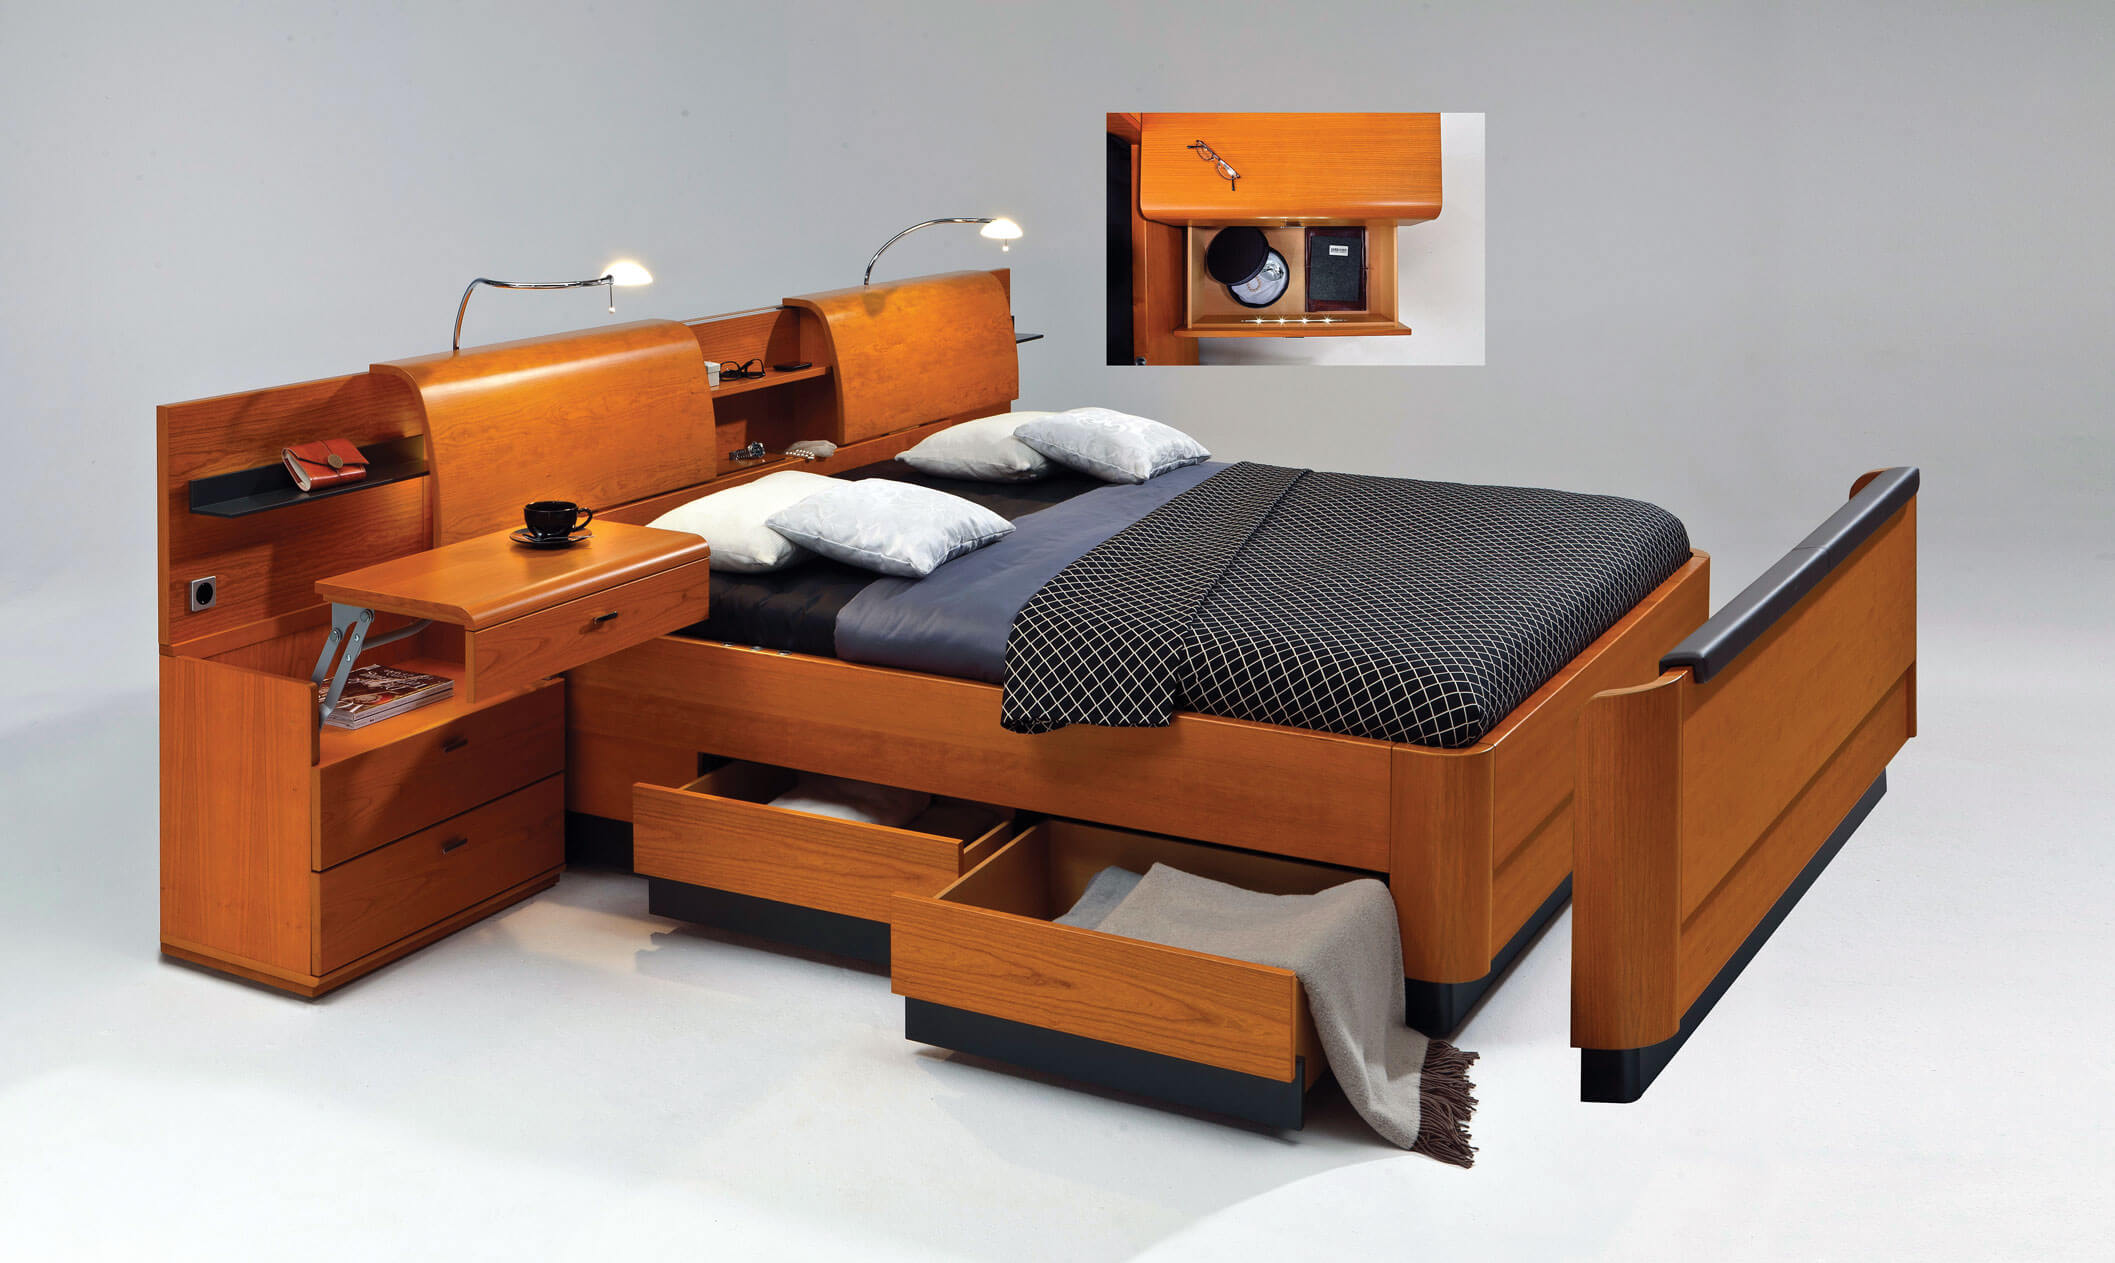 Bed Design Ideas also Bunk Bed Plans additionally Simple TV Stand 